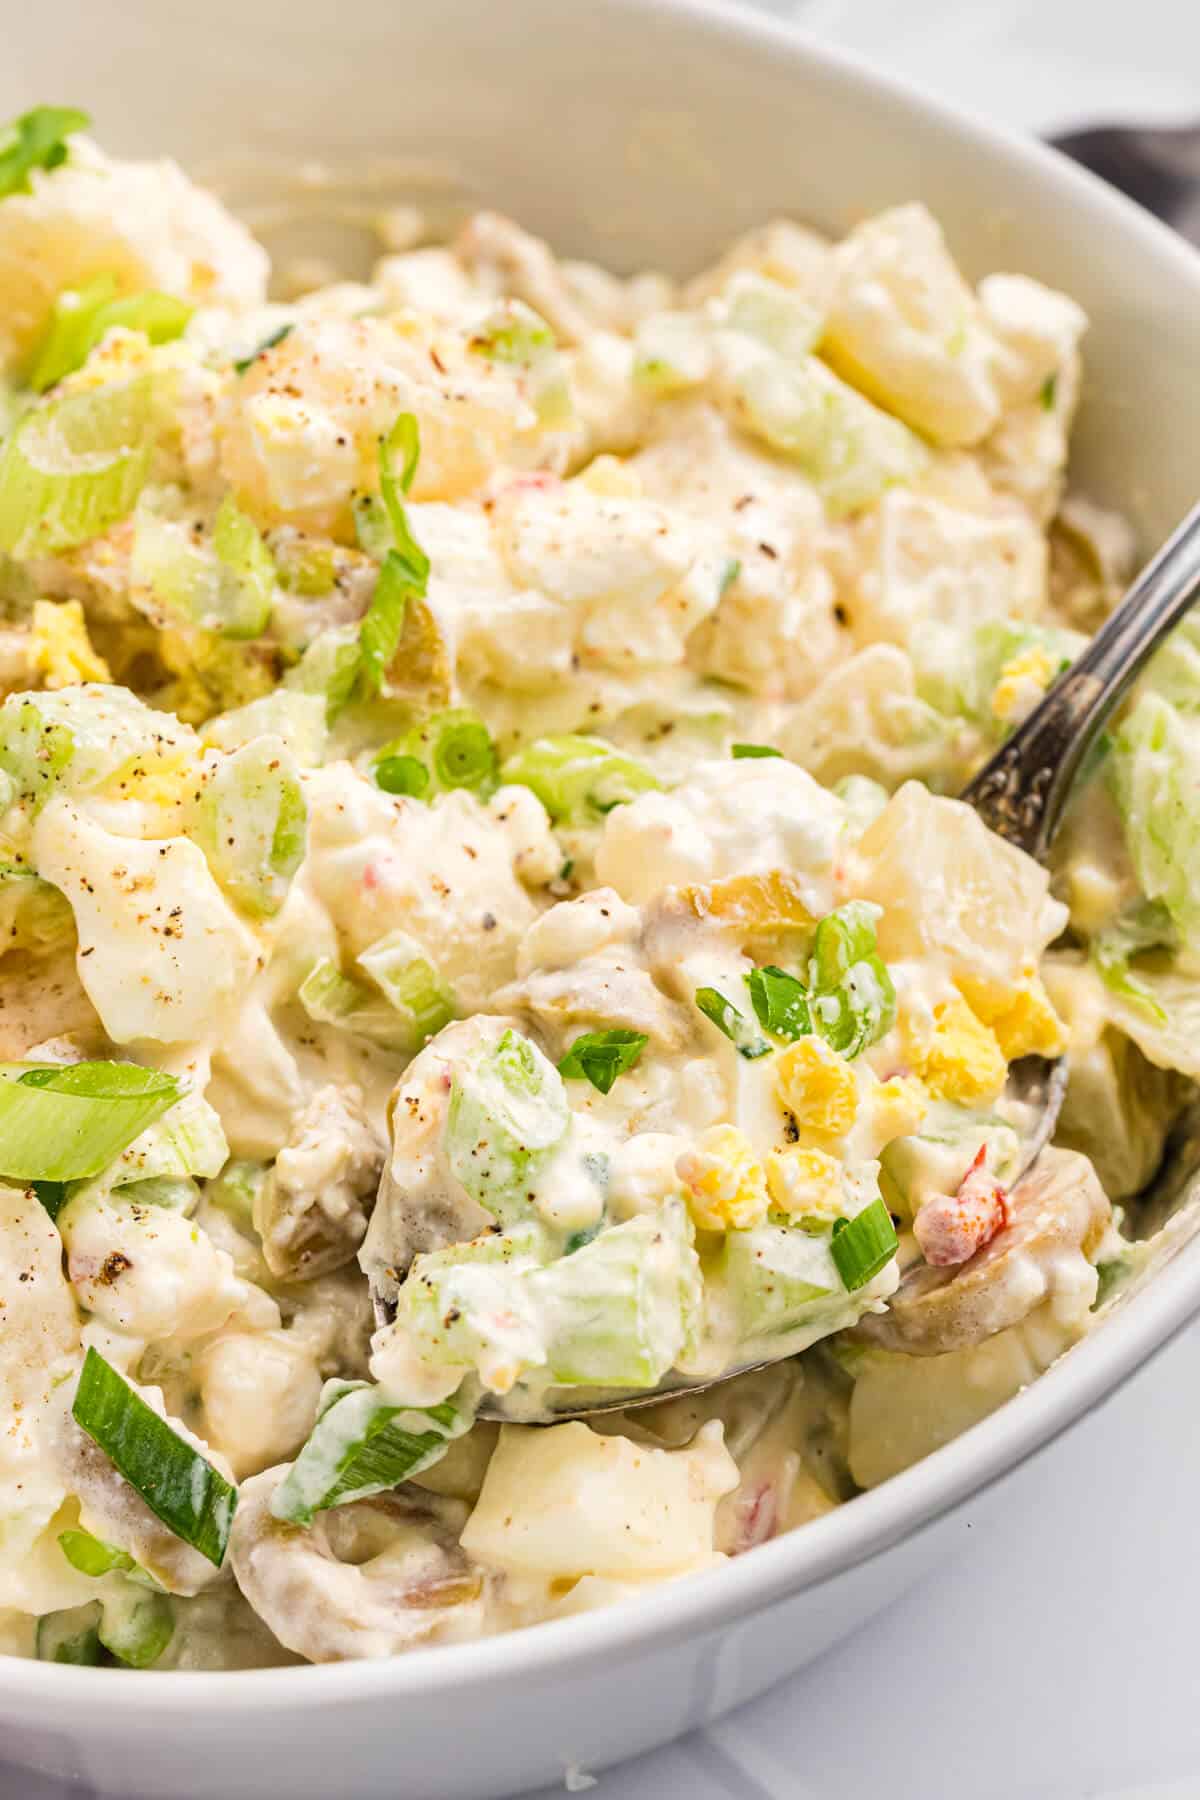 A bowl of cheese potato salad with a spoon.